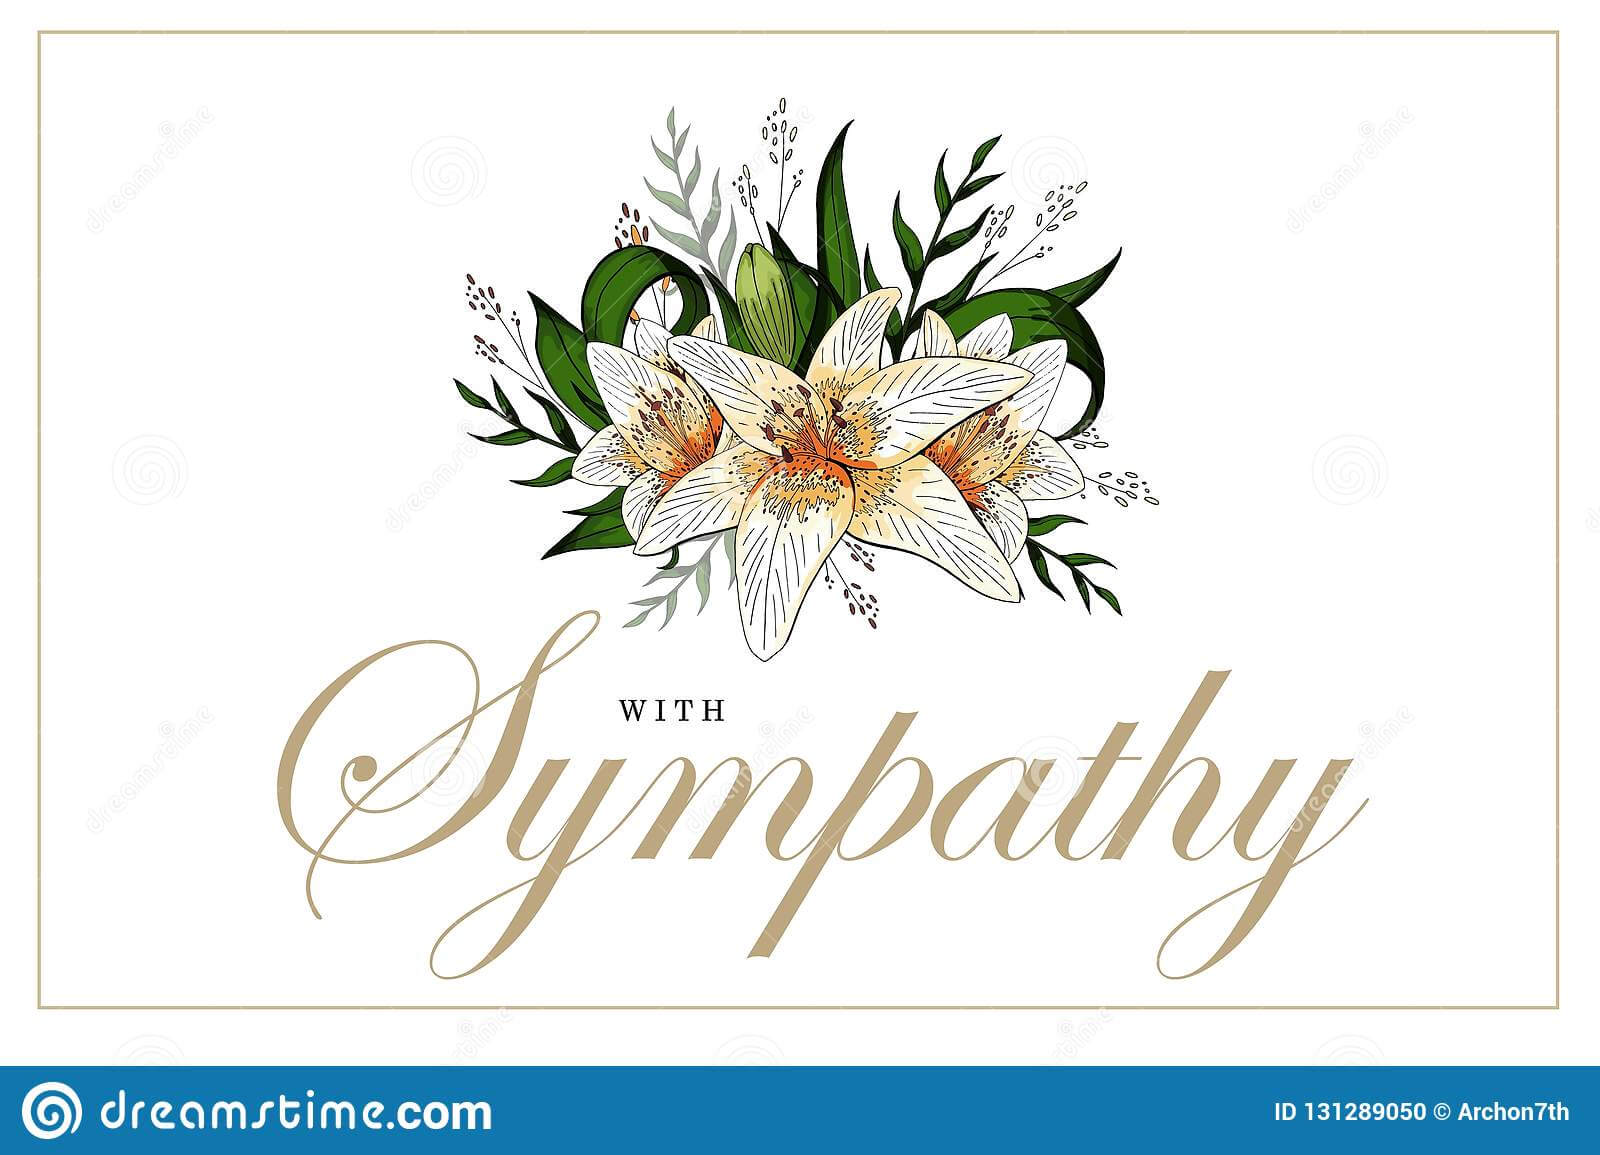 Condolences Sympathy Card Floral Lily Bouquet And Lettering Throughout Sympathy Card Template